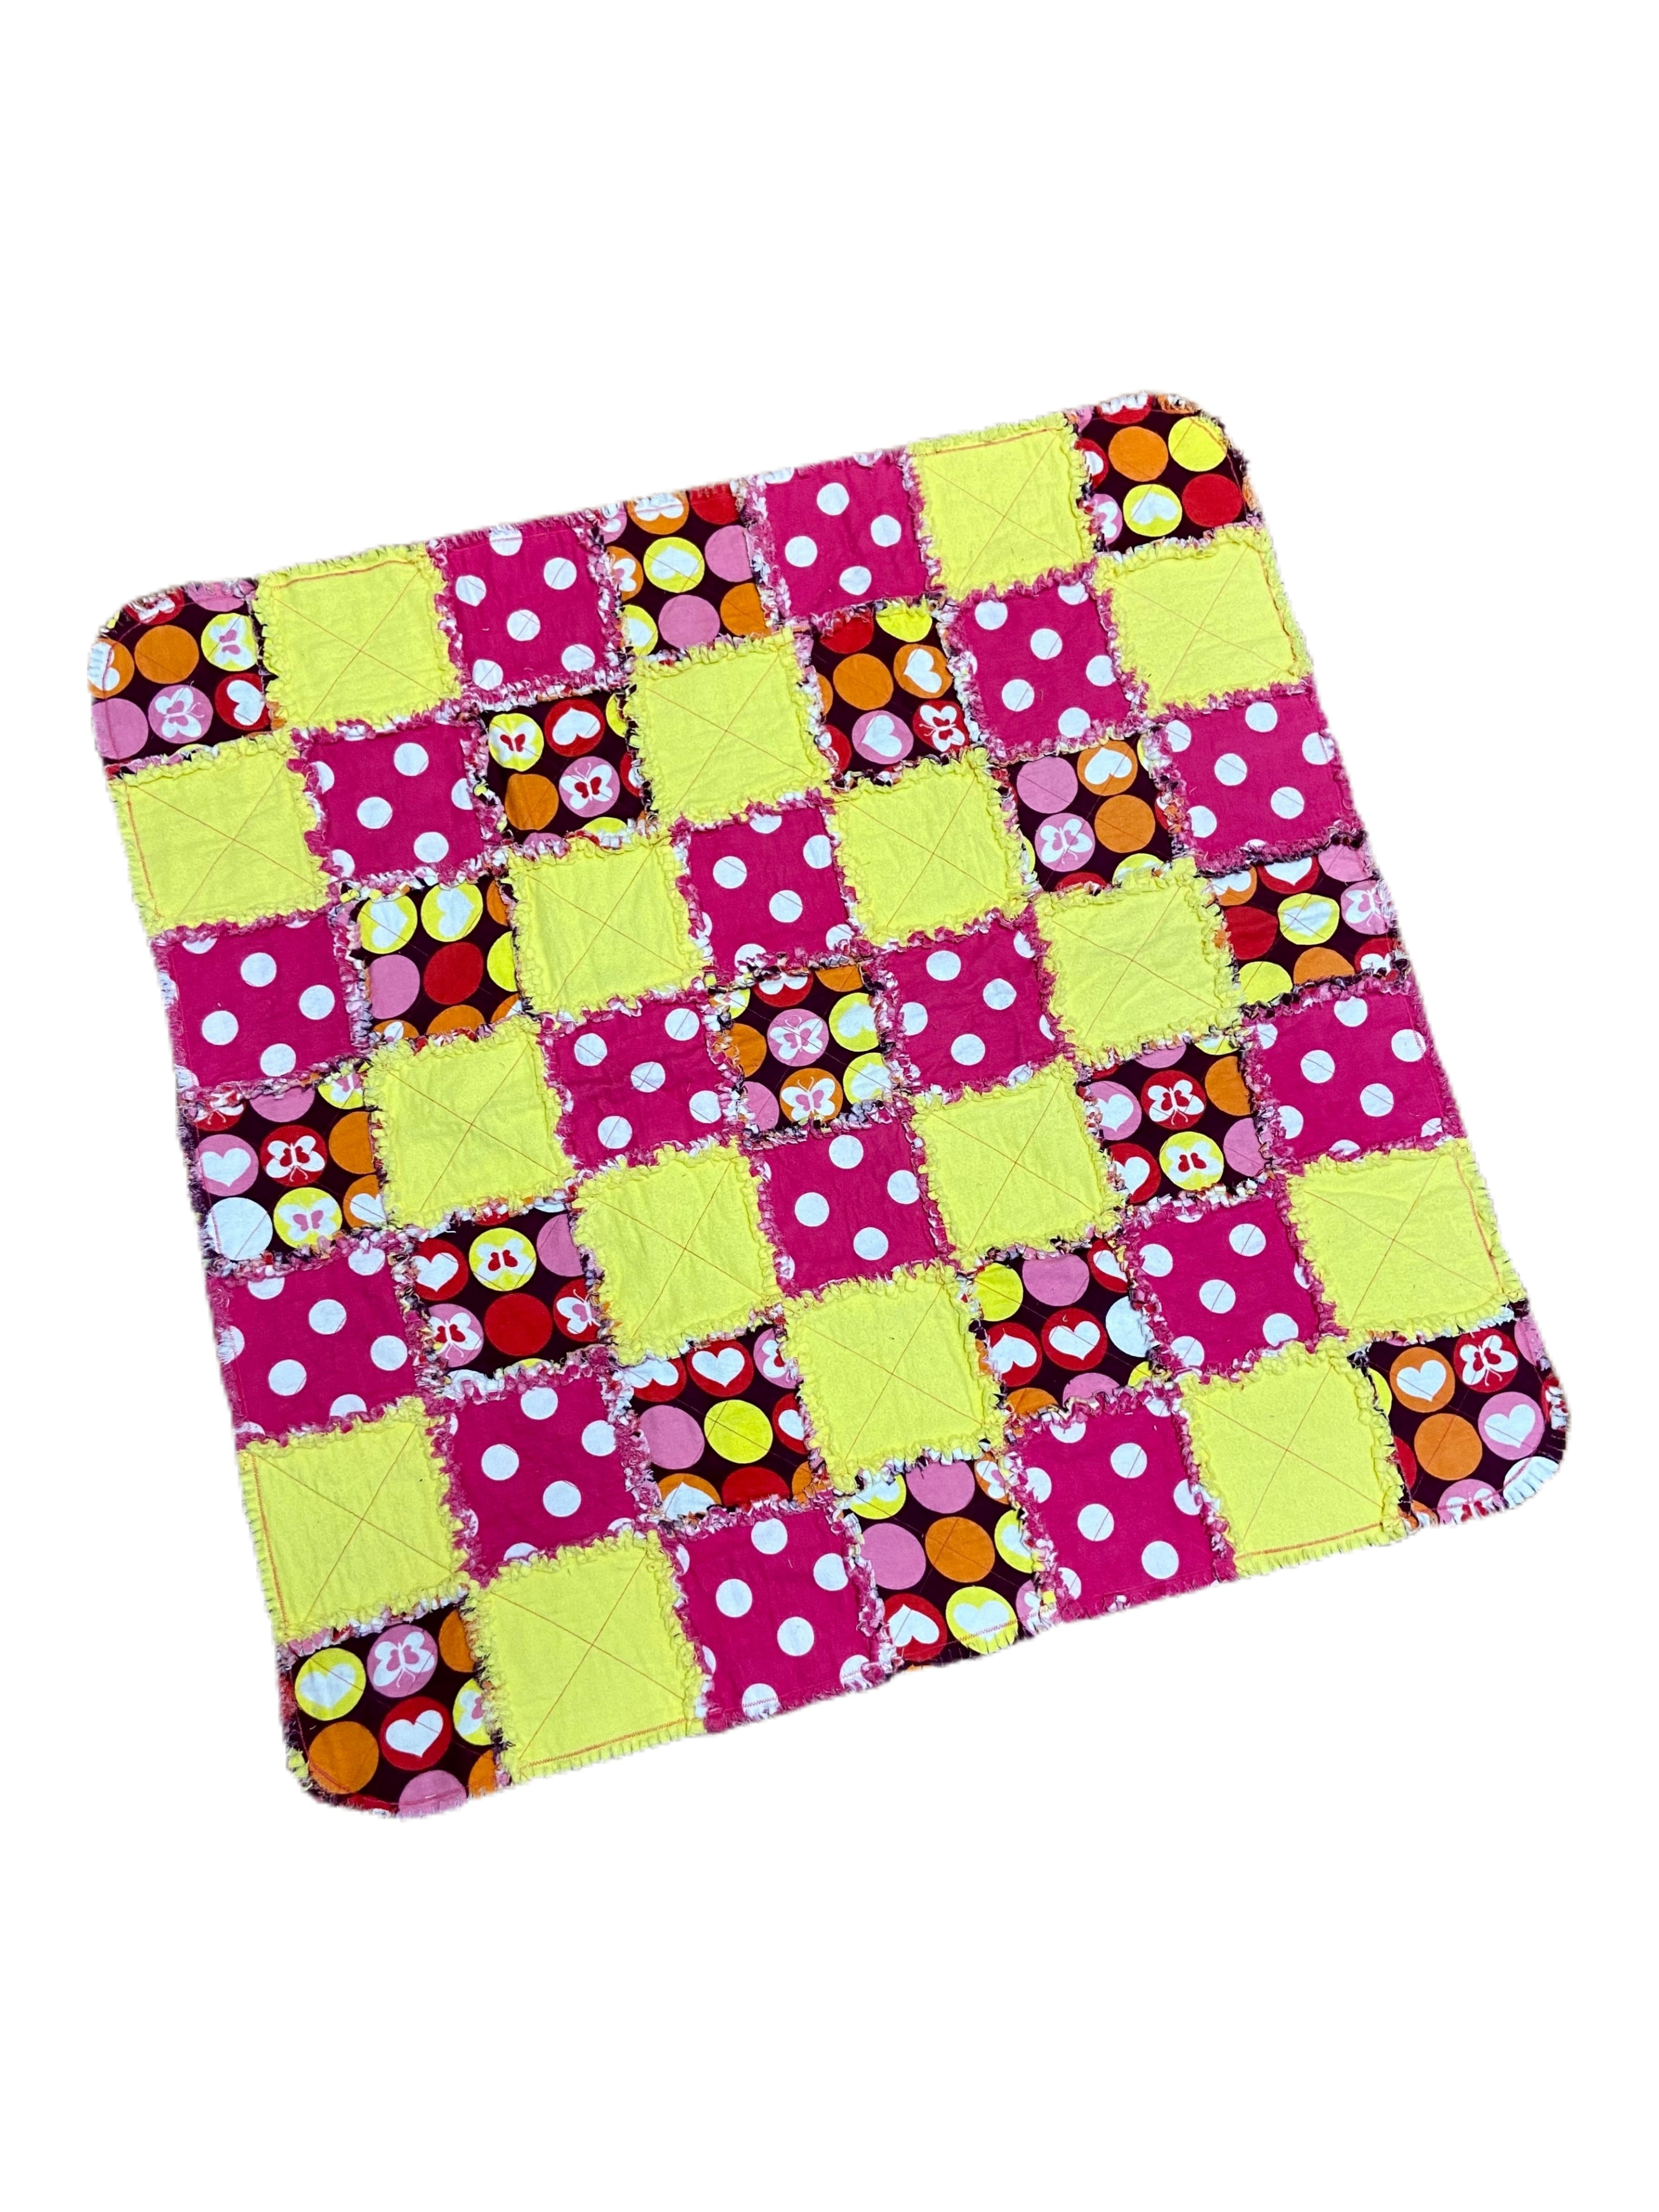 Pink and Yellow Polka Dot Cotton Rag Quilt